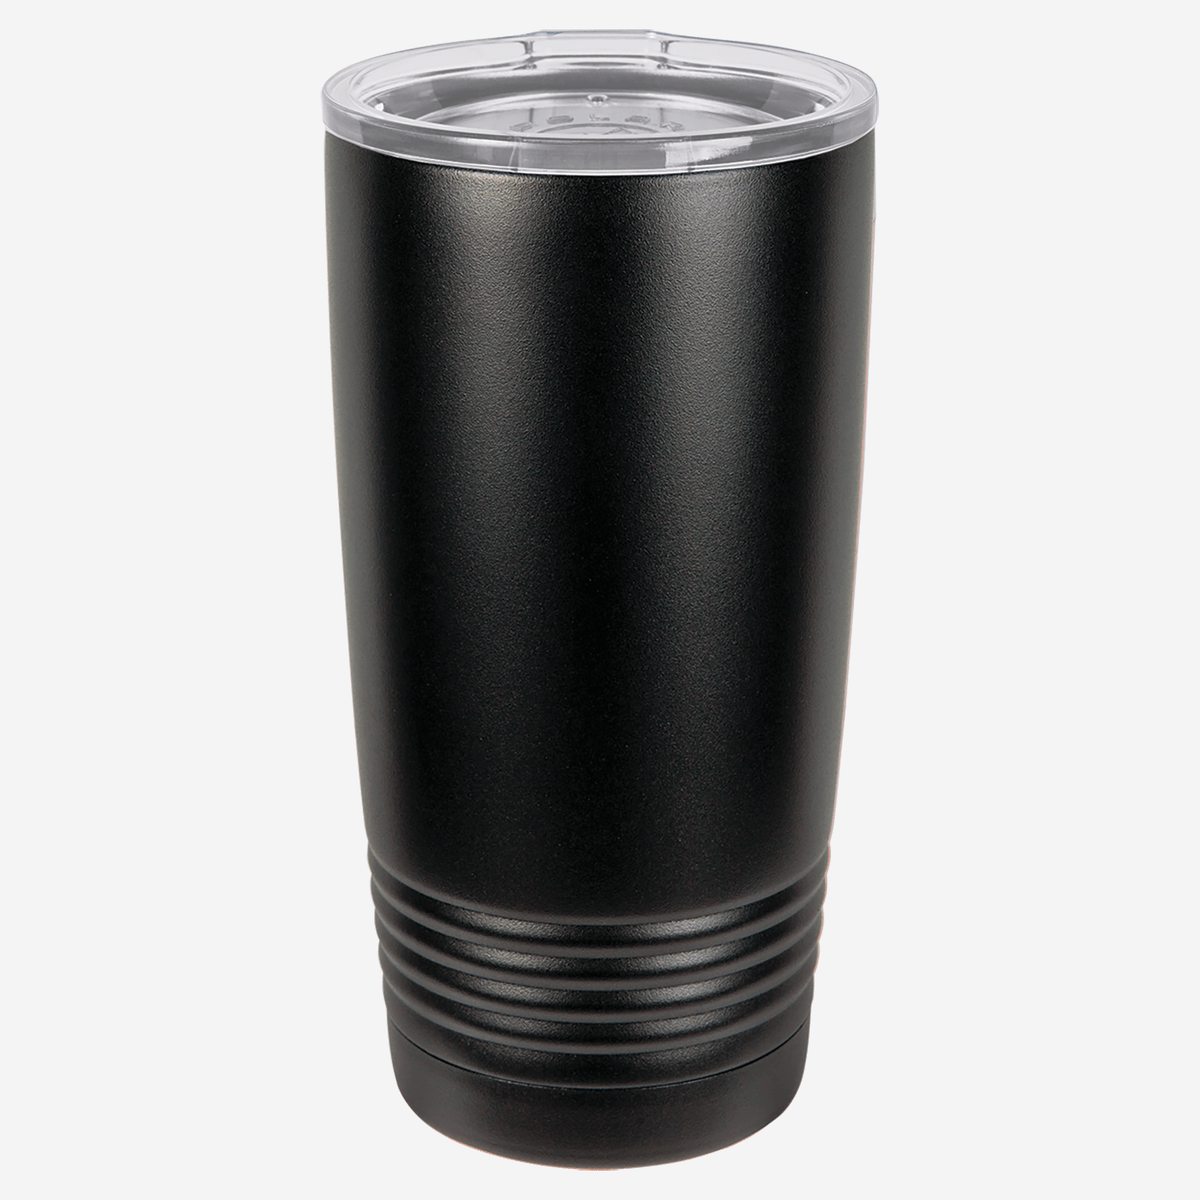 20 oz. black stainless steel tumbler with no silver ring at top with lid grip rings on the bottom